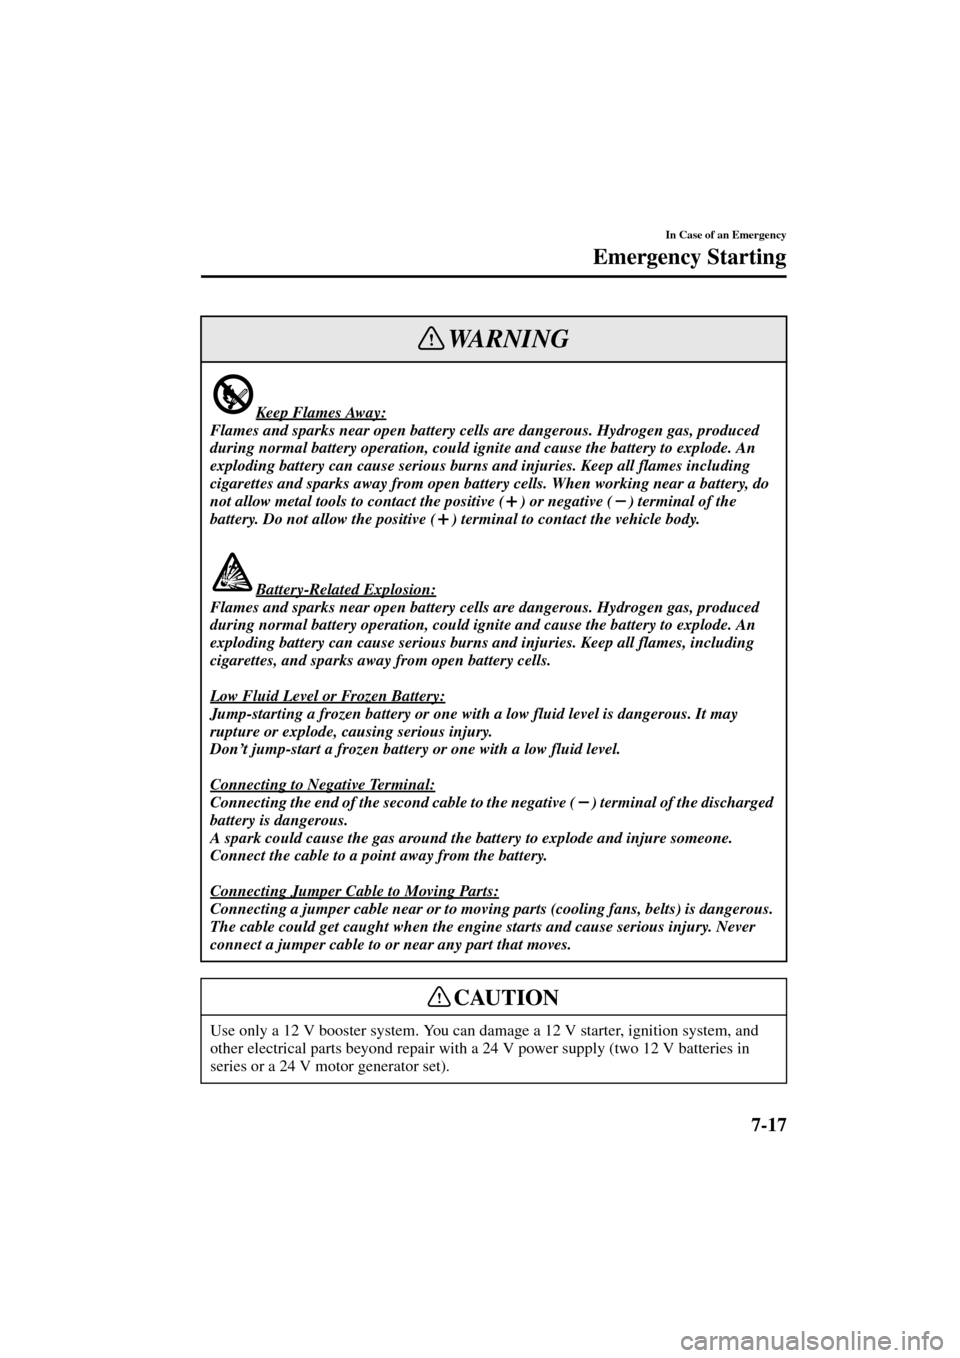 MAZDA MODEL 3 HATCHBACK 2004   (in English) User Guide 7-17
In Case of an Emergency
Emergency Starting
Form No. 8S18-EA-03I
Keep Flames Away:
Flames and sparks near open battery cells are dangerous. Hydrogen gas, produced 
during normal battery operation,